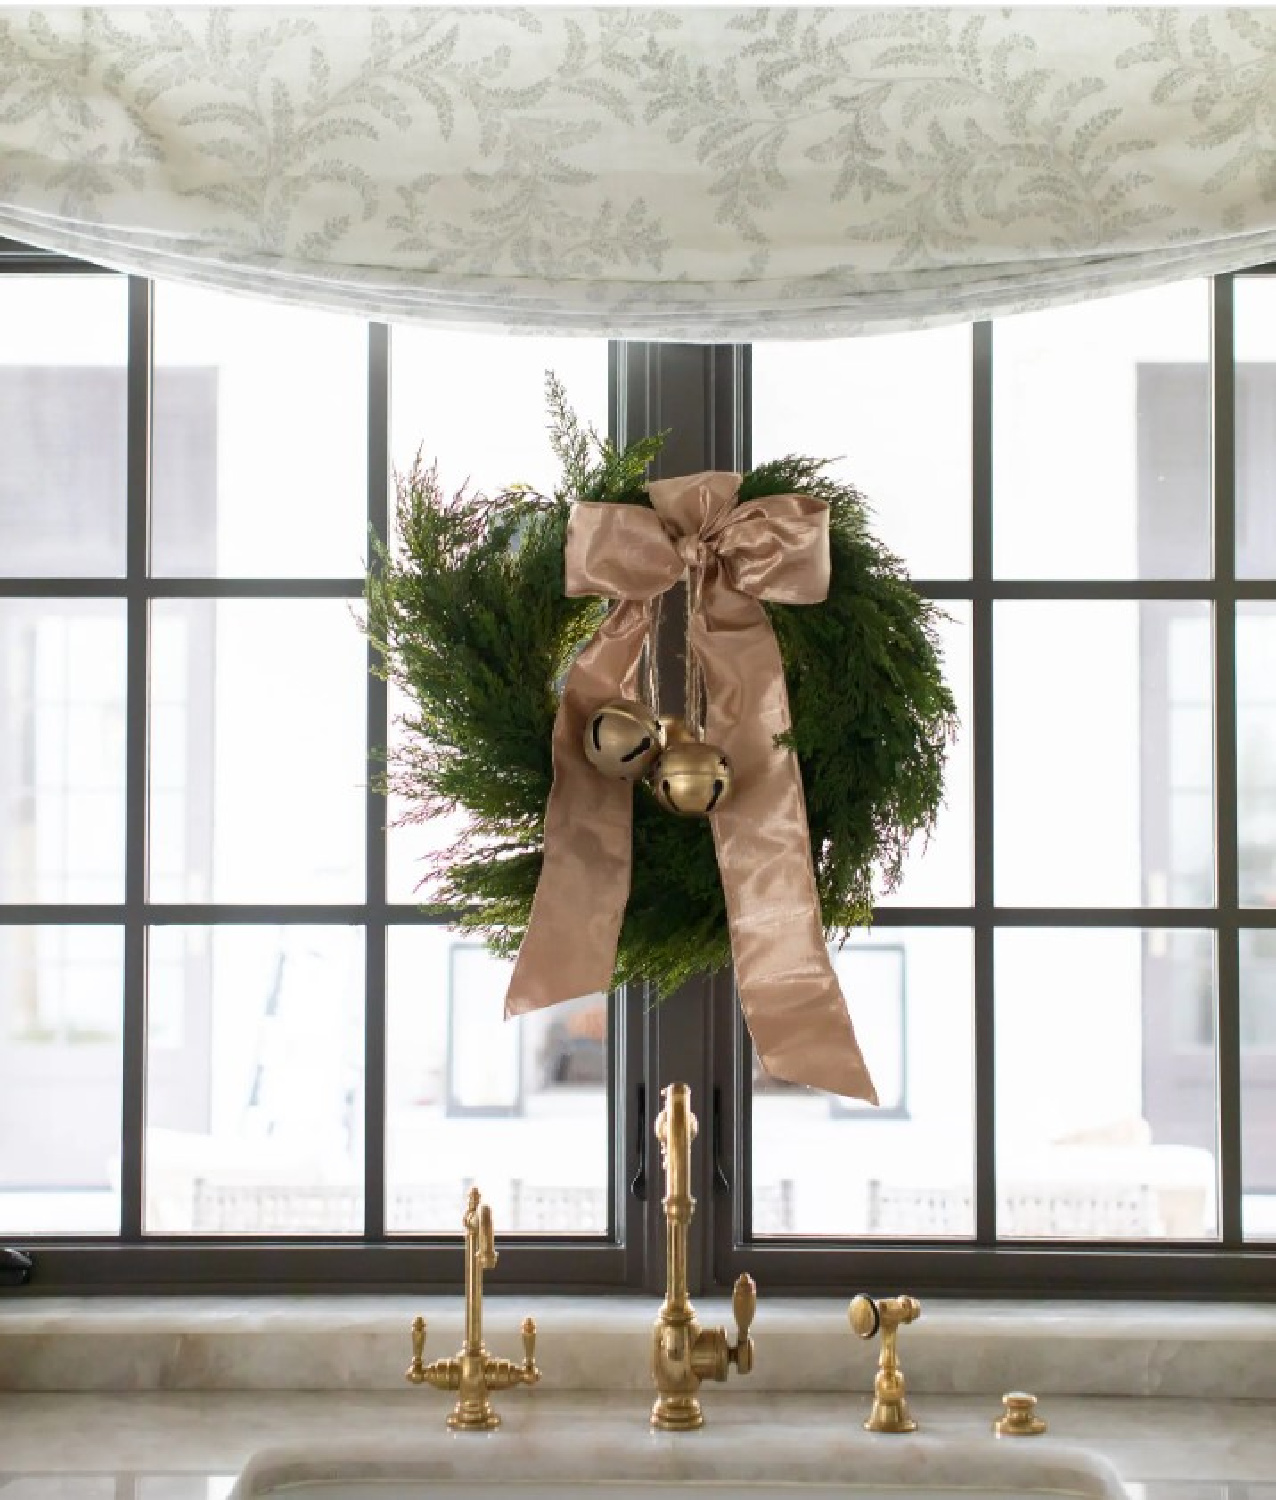 Lovely elegant Christmas wreath with blush pink ribbon at kitchen sink window - Marie Flanigan Interiors. #christmaswreaths #frenchcountrychristmas